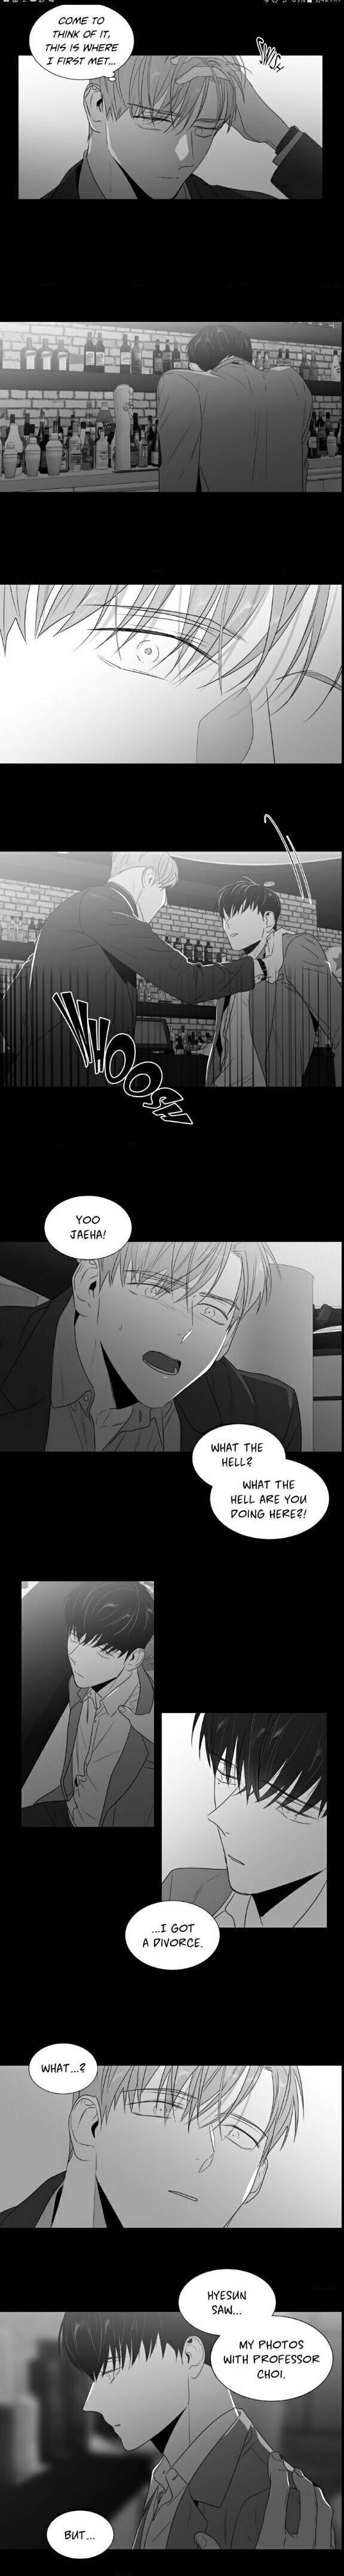 Lover Boy (Lezhin) Chapter 048.5 page 16